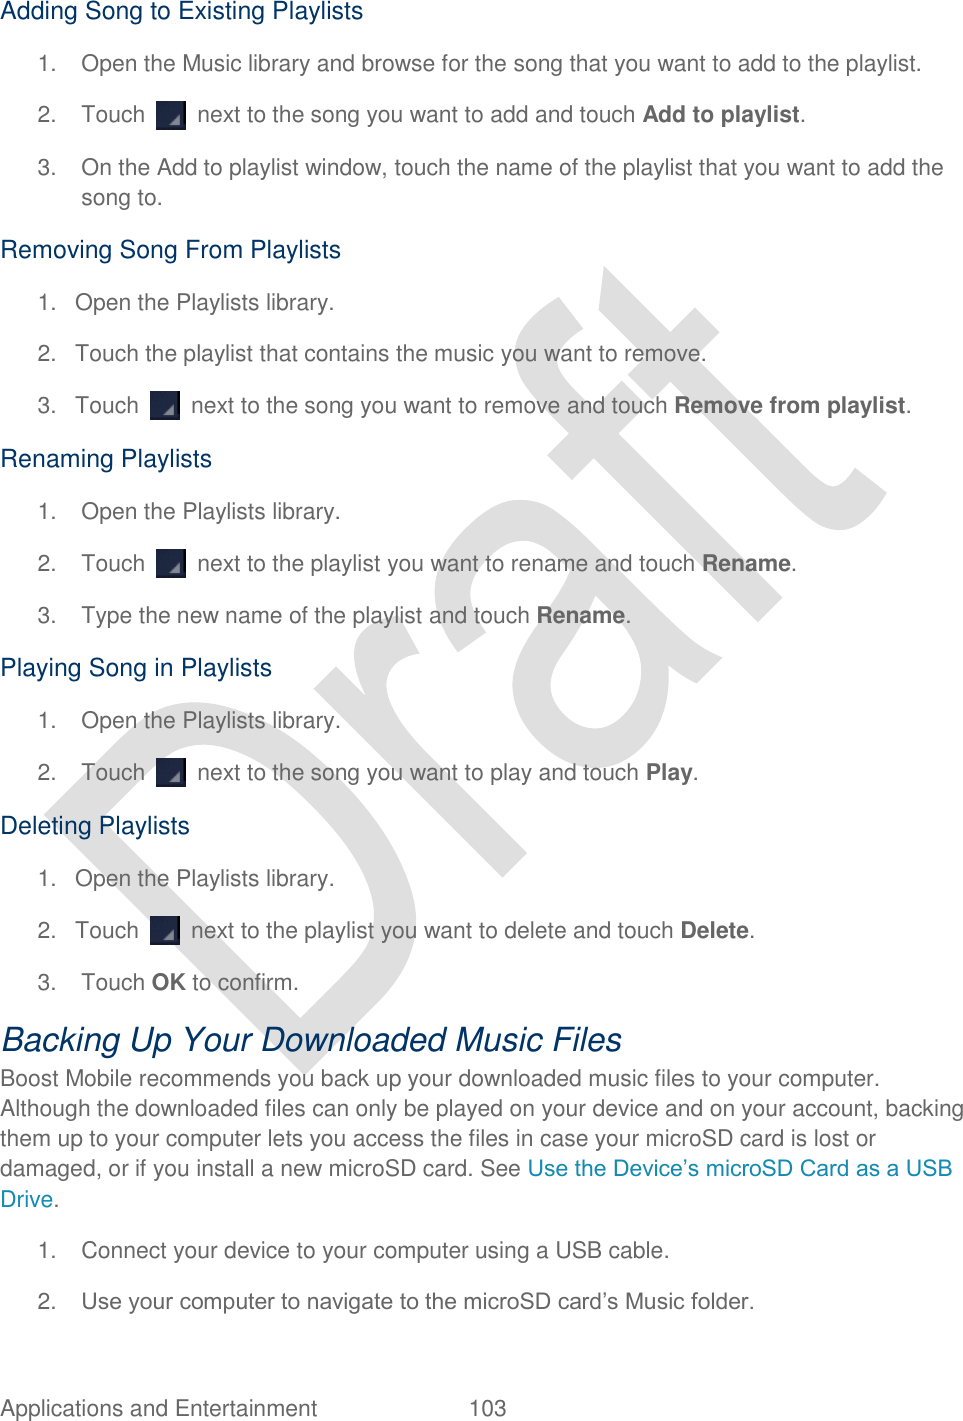  Applications and Entertainment  103   Adding Song to Existing Playlists 1.  Open the Music library and browse for the song that you want to add to the playlist. 2.  Touch    next to the song you want to add and touch Add to playlist. 3.  On the Add to playlist window, touch the name of the playlist that you want to add the song to. Removing Song From Playlists 1.  Open the Playlists library. 2.  Touch the playlist that contains the music you want to remove. 3.  Touch    next to the song you want to remove and touch Remove from playlist. Renaming Playlists 1.  Open the Playlists library. 2.  Touch    next to the playlist you want to rename and touch Rename. 3.  Type the new name of the playlist and touch Rename. Playing Song in Playlists 1.  Open the Playlists library. 2.  Touch    next to the song you want to play and touch Play. Deleting Playlists 1.  Open the Playlists library. 2.  Touch    next to the playlist you want to delete and touch Delete. 3.  Touch OK to confirm. Backing Up Your Downloaded Music Files Boost Mobile recommends you back up your downloaded music files to your computer. Although the downloaded files can only be played on your device and on your account, backing them up to your computer lets you access the files in case your microSD card is lost or damaged, or if you install a new microSD card. See Use the Device‟s microSD Card as a USB Drive. 1.  Connect your device to your computer using a USB cable. 2. Use your computer to navigate to the microSD card‟s Music folder. 